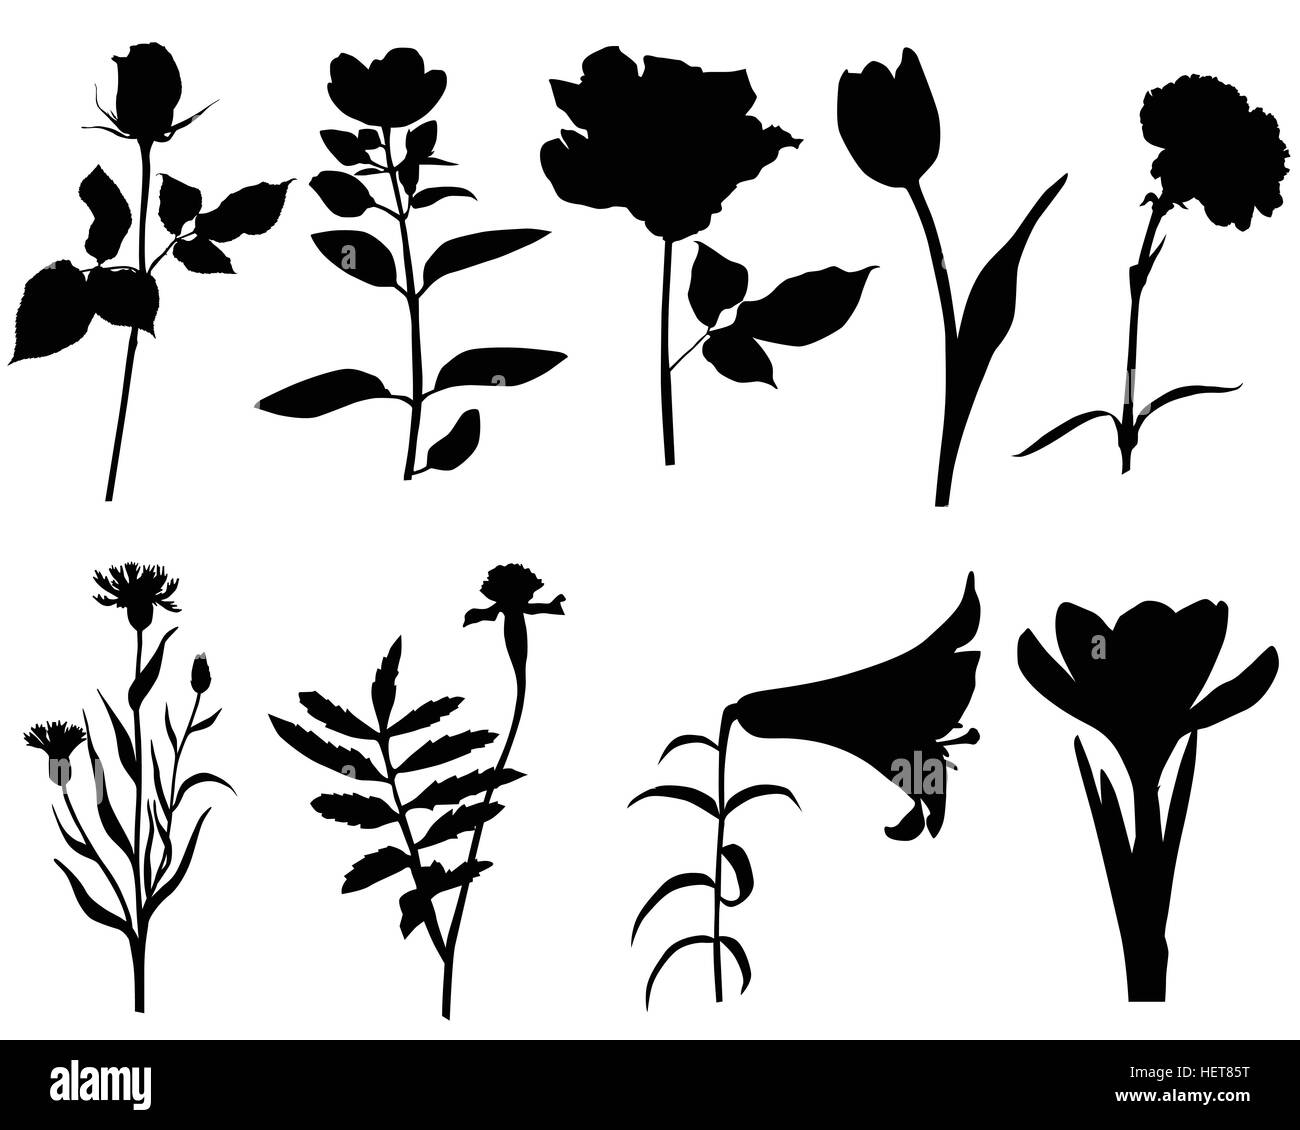 Collection of silhouettes of different species of flowers Stock Vector